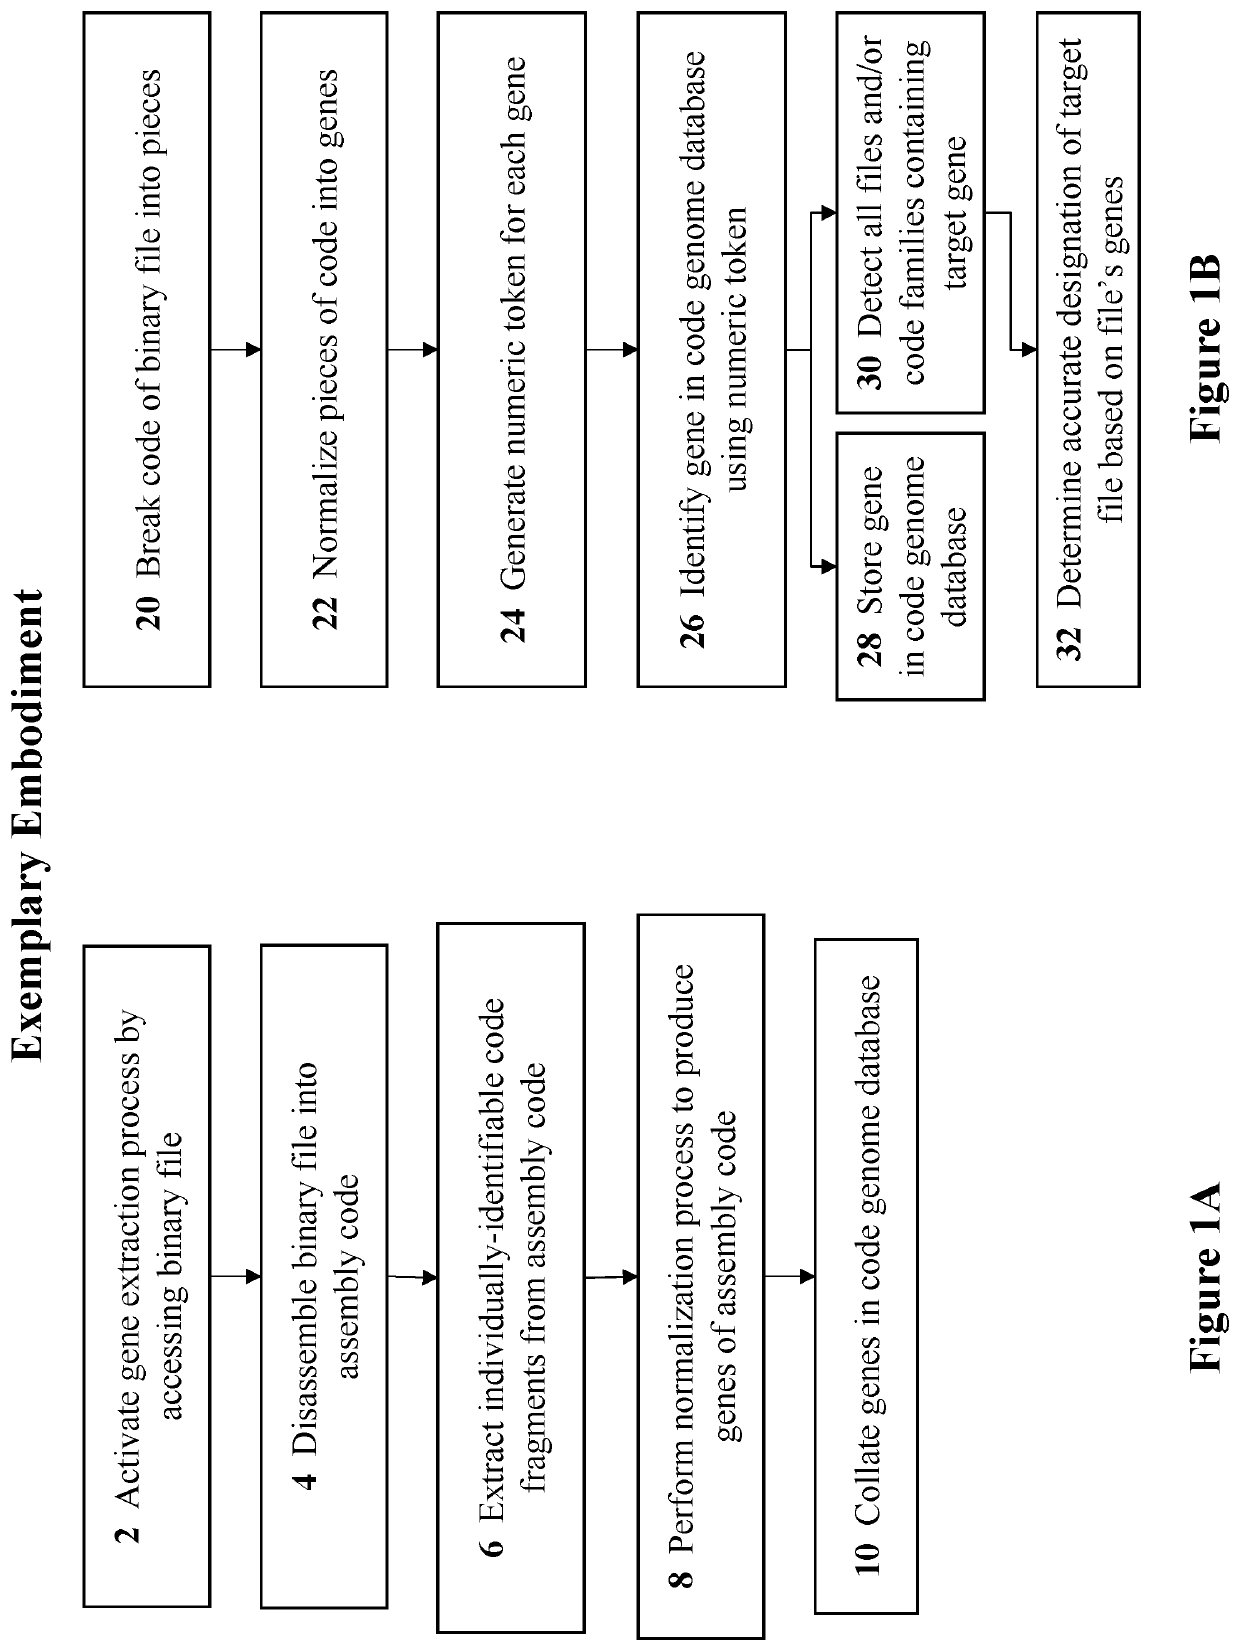 Methods and systems for genetic malware analysis and classification using code reuse patterns